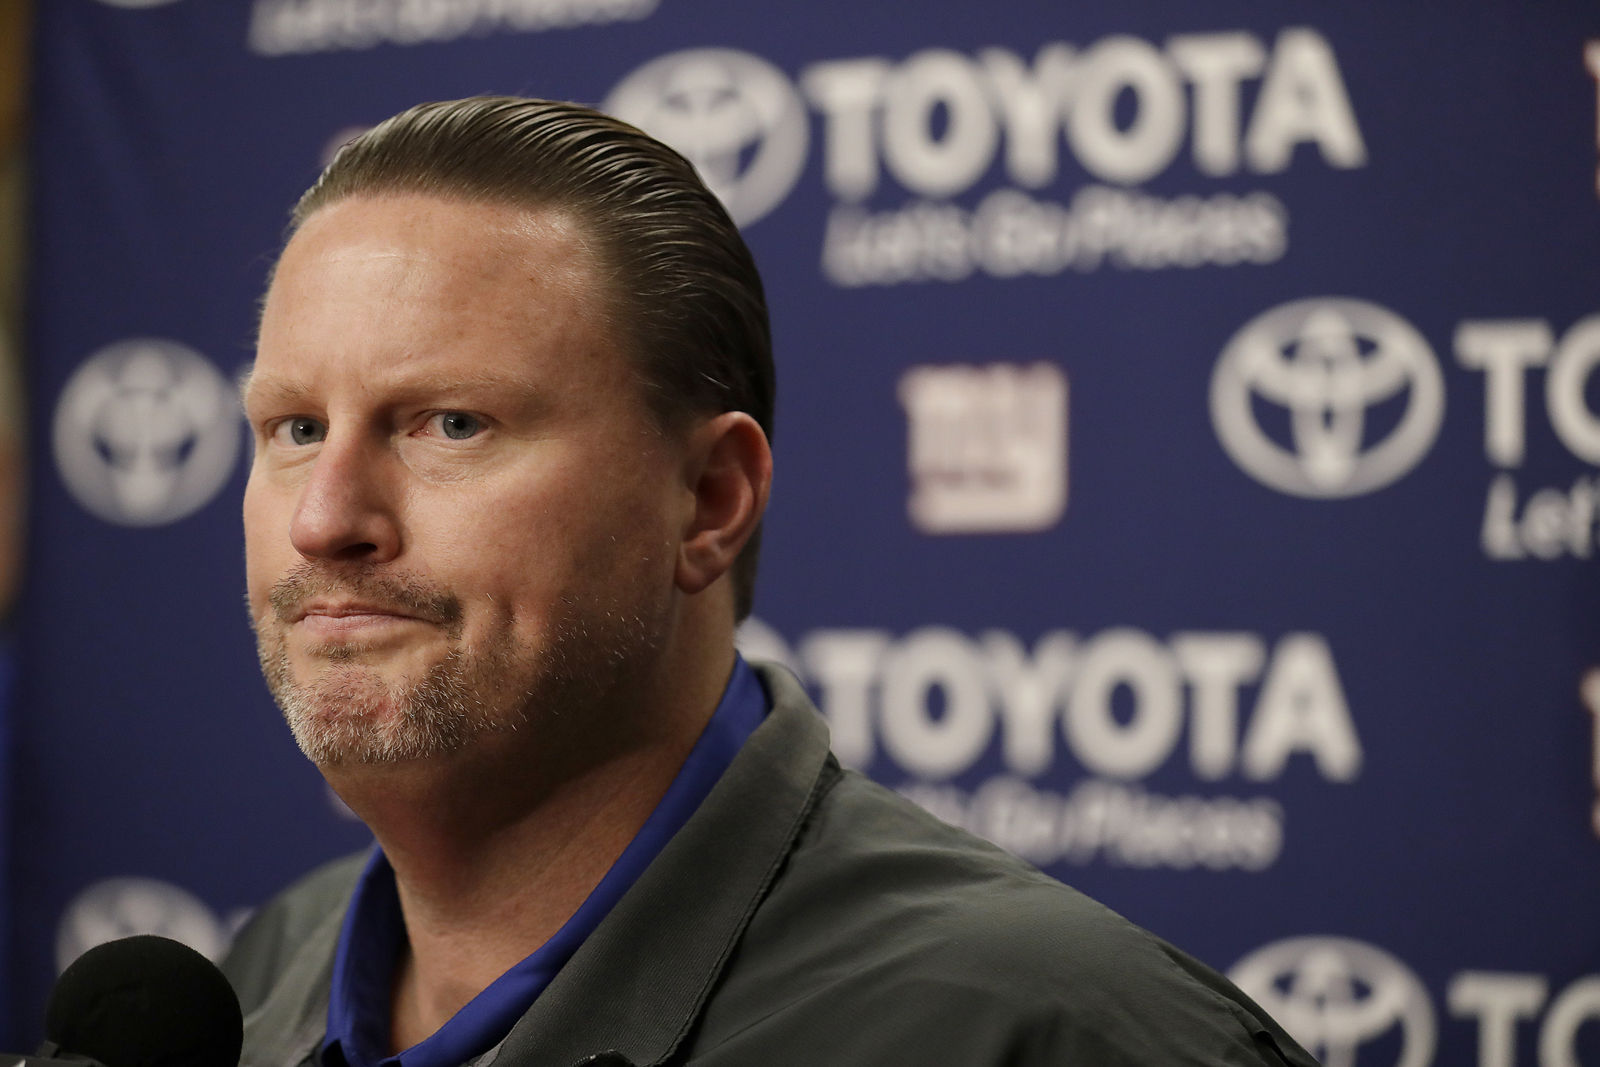 The New York Giants didn't even wait for the end of the season to get rid of head coach Ben McAdoo. (AP Photo/Marcio Jose Sanchez)